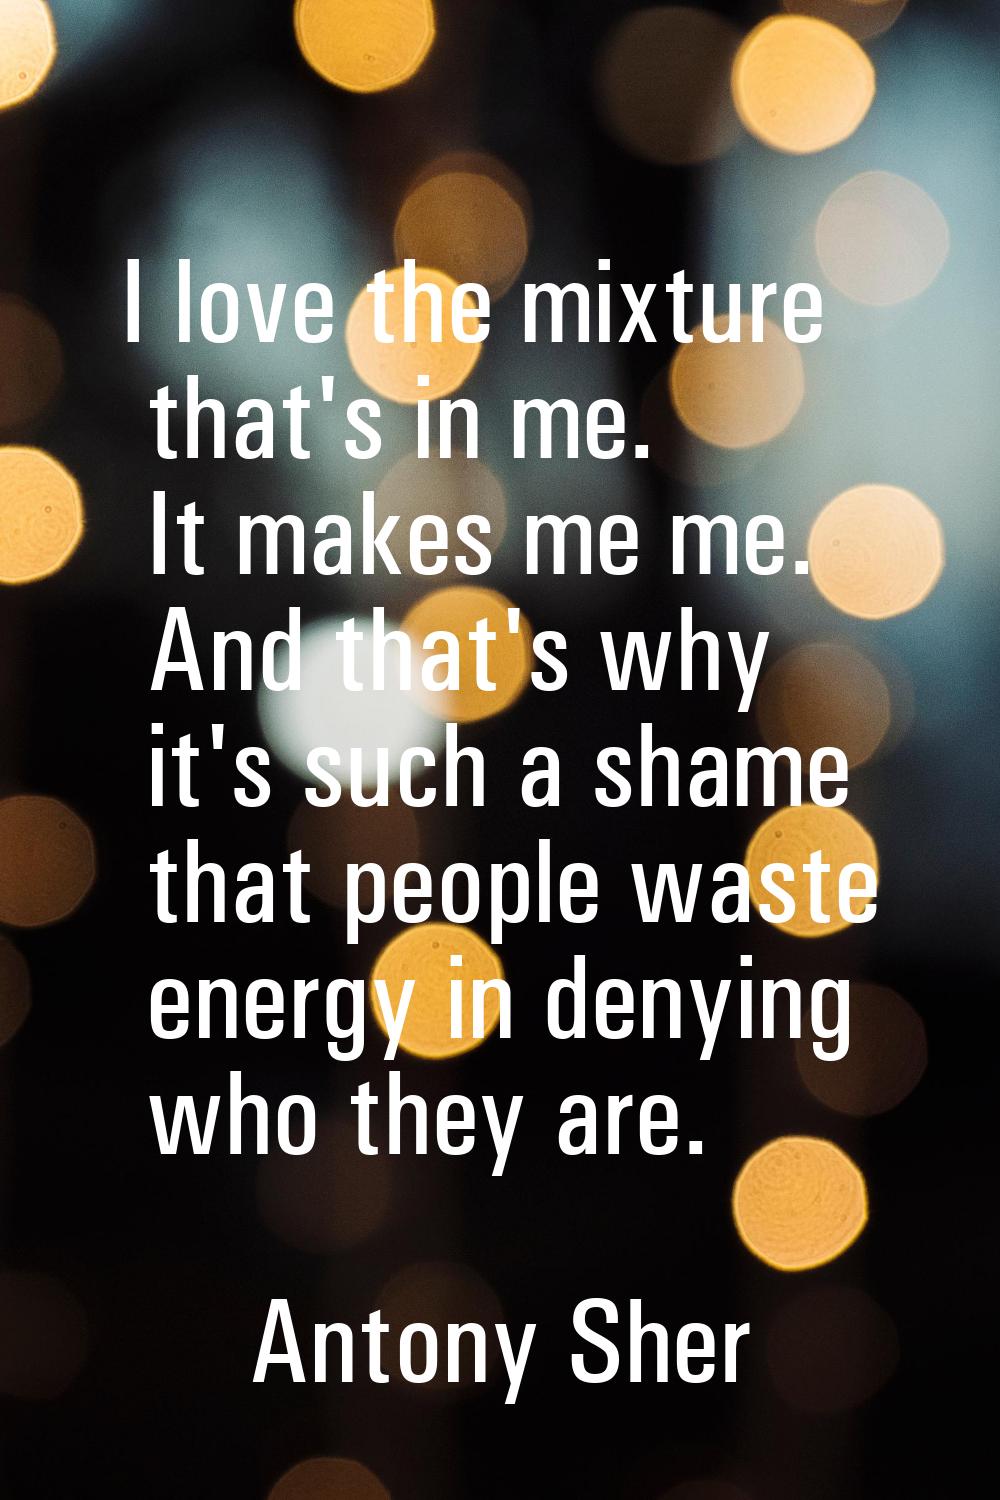 I love the mixture that's in me. It makes me me. And that's why it's such a shame that people waste